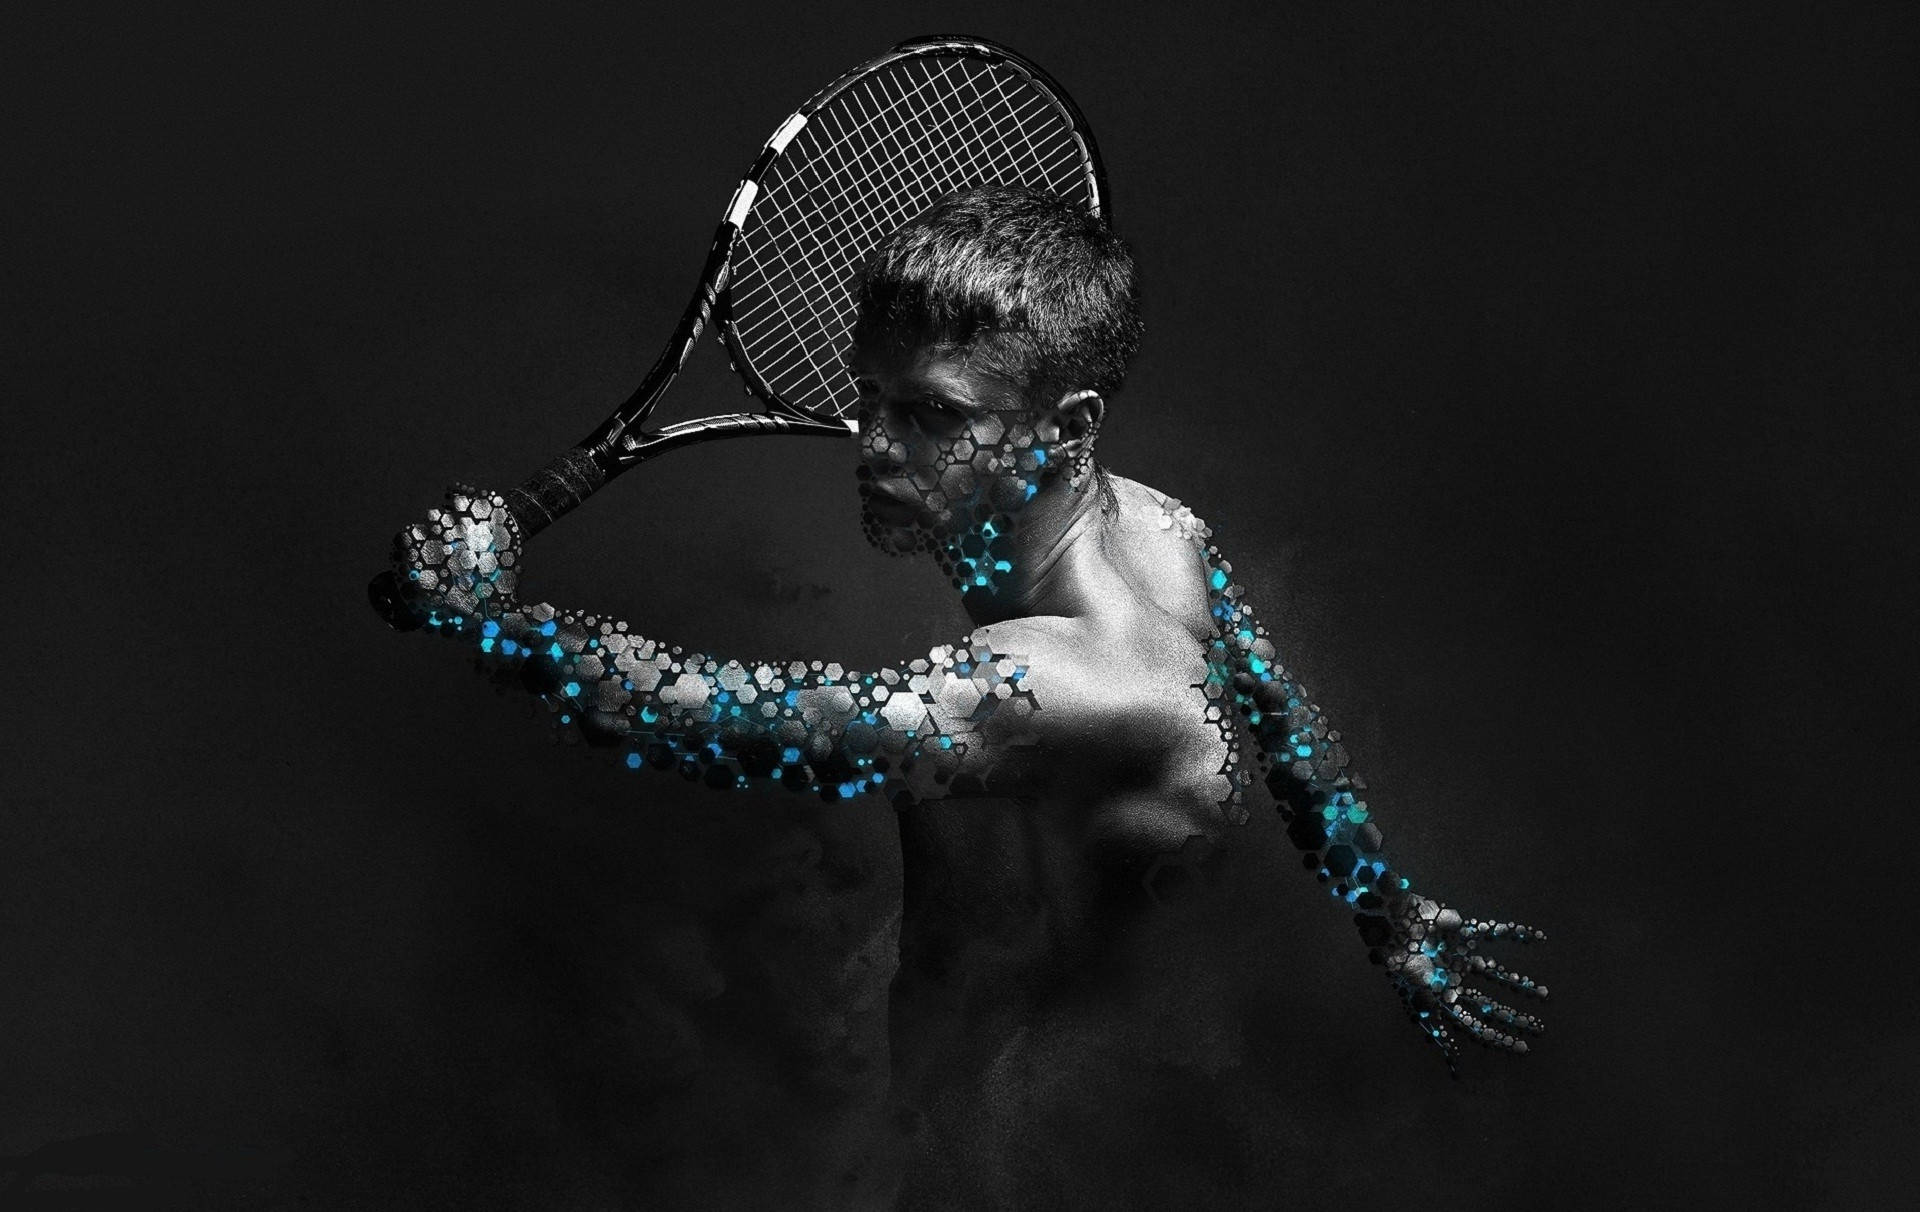 Male Tennis Player Background